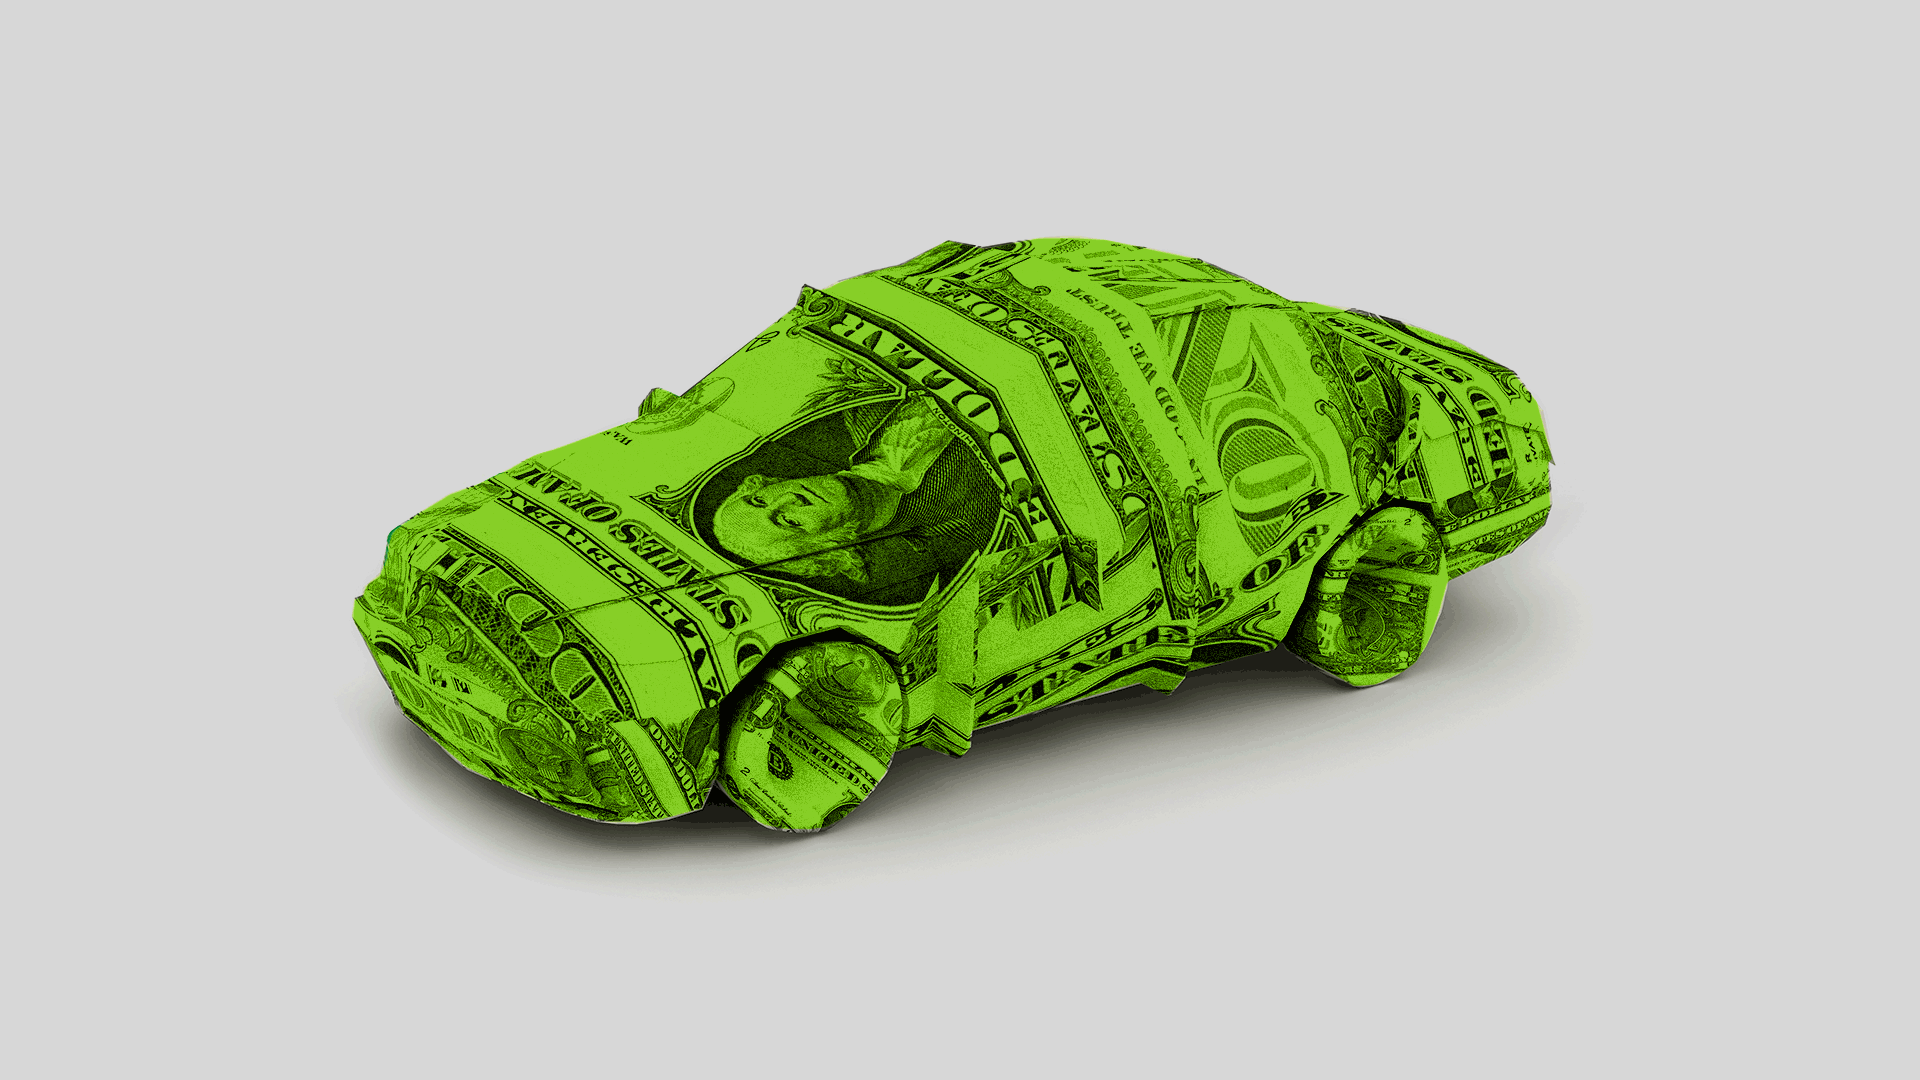 Illustration of a car made out of folded paper money.